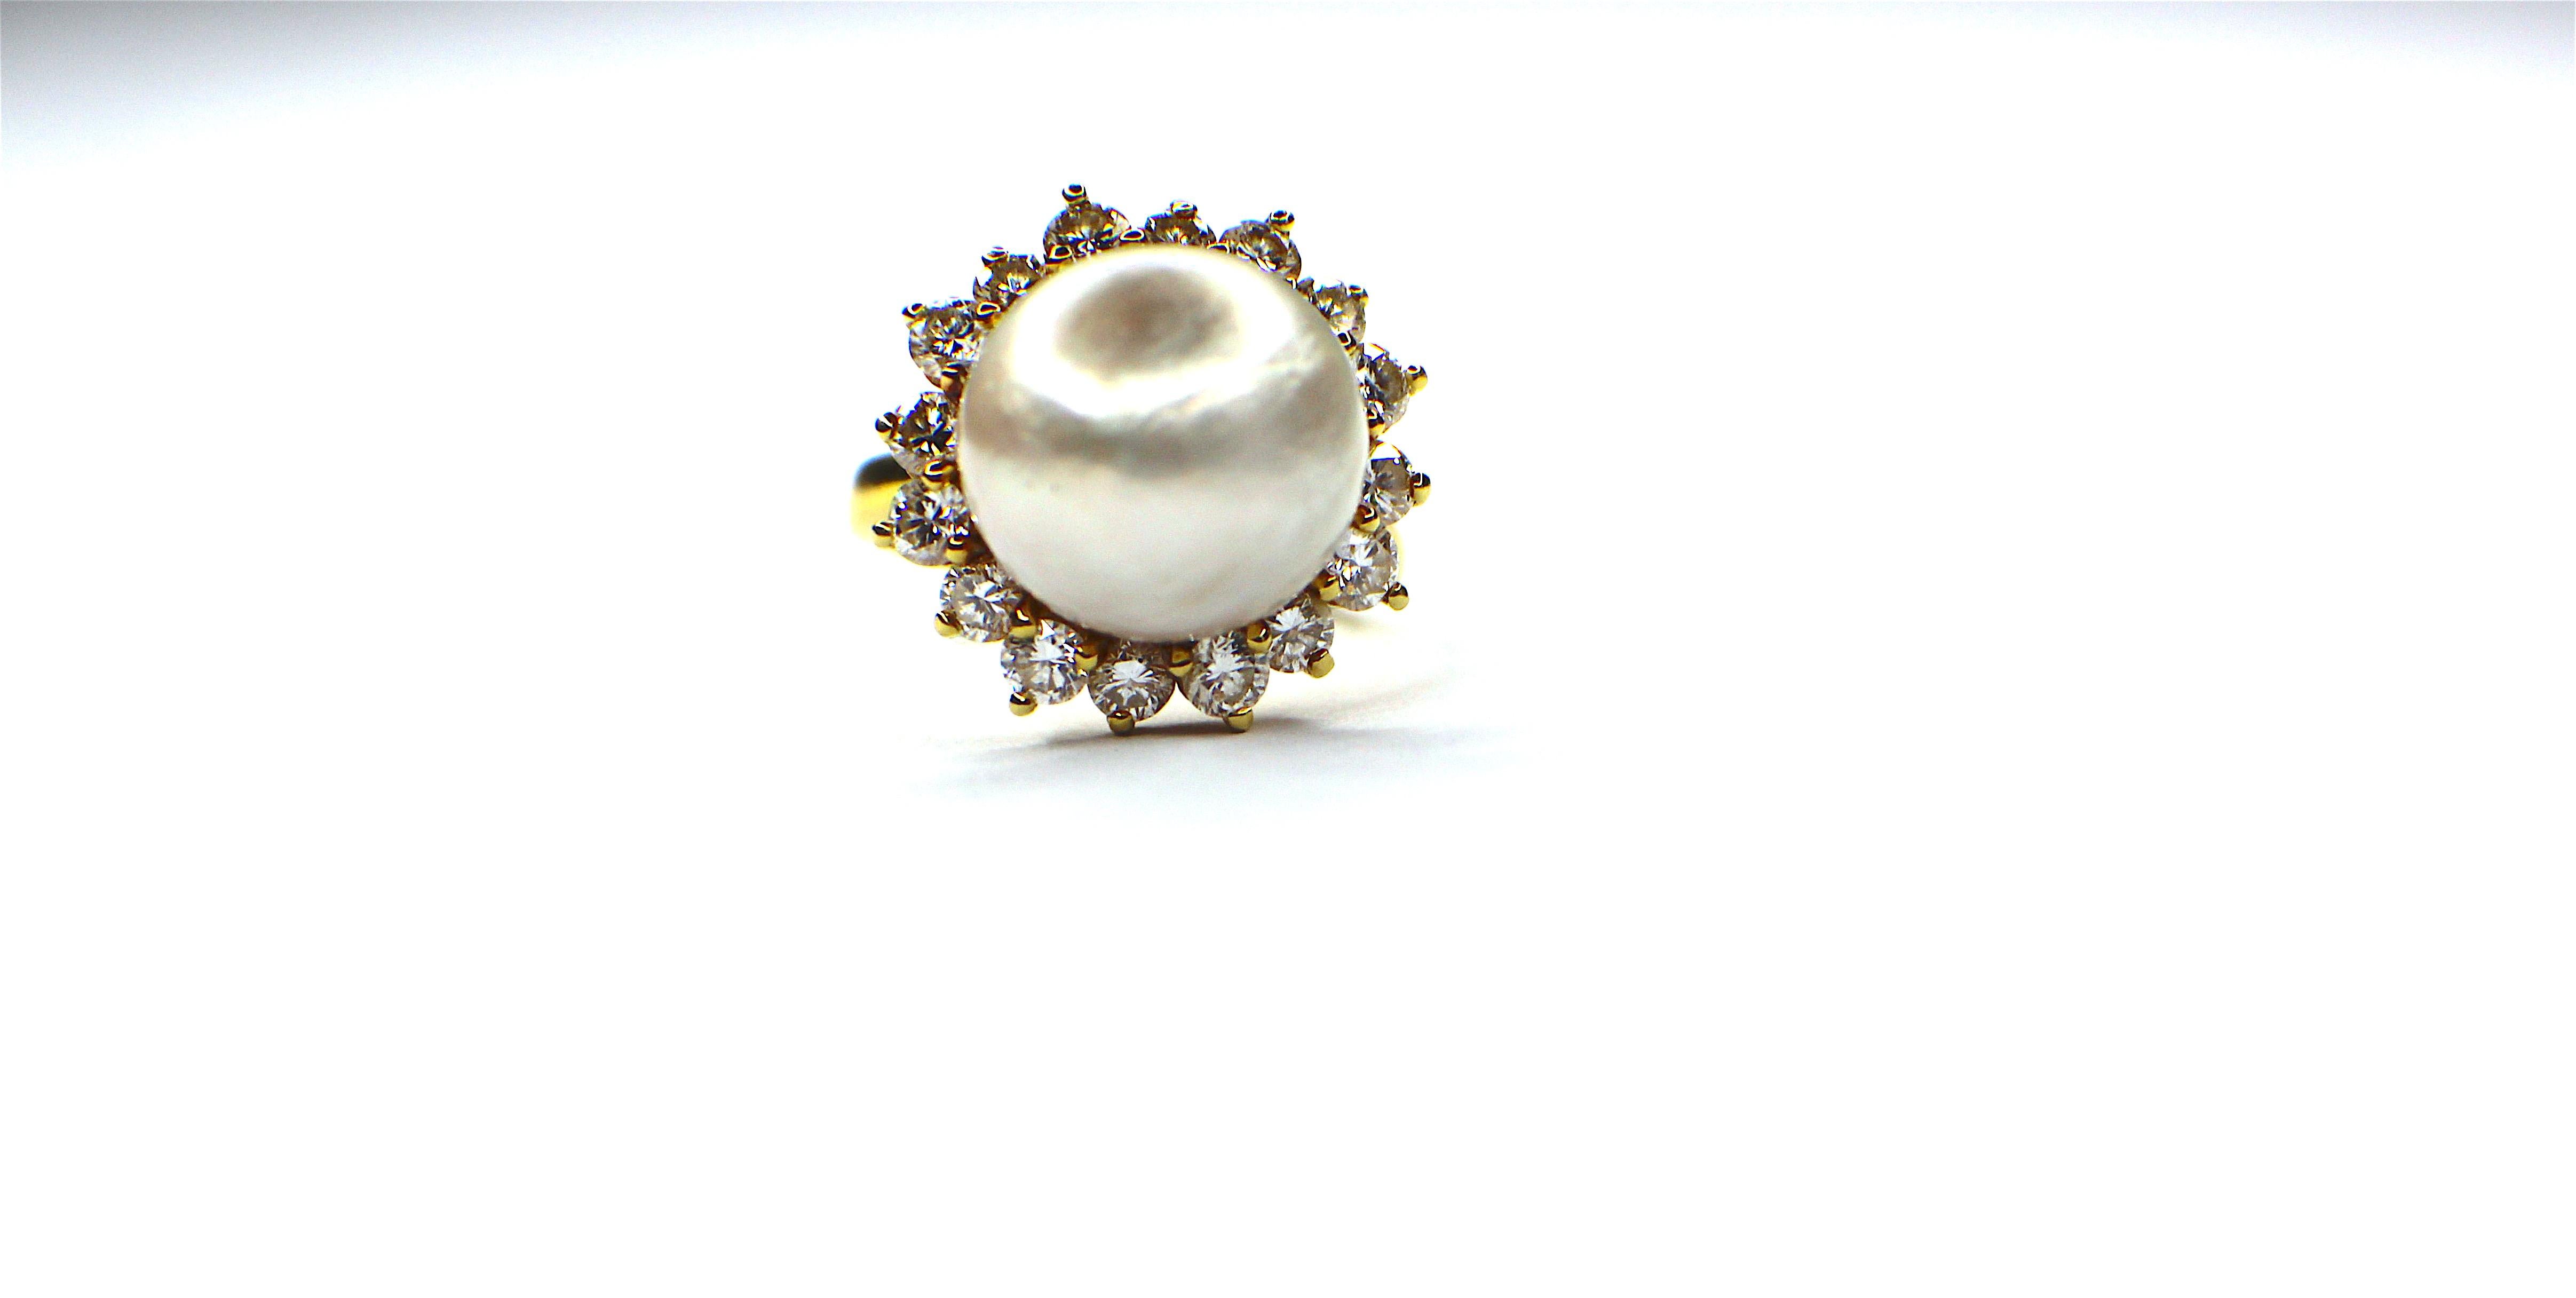 Gemolithos, Cultured South Seas Pearl & Diamond Ring, est. diamonds circa 1.0ct, 18k gold, weight 7,5gr.  pearl 12.00 mm diameter, ring size 49.  1980´s